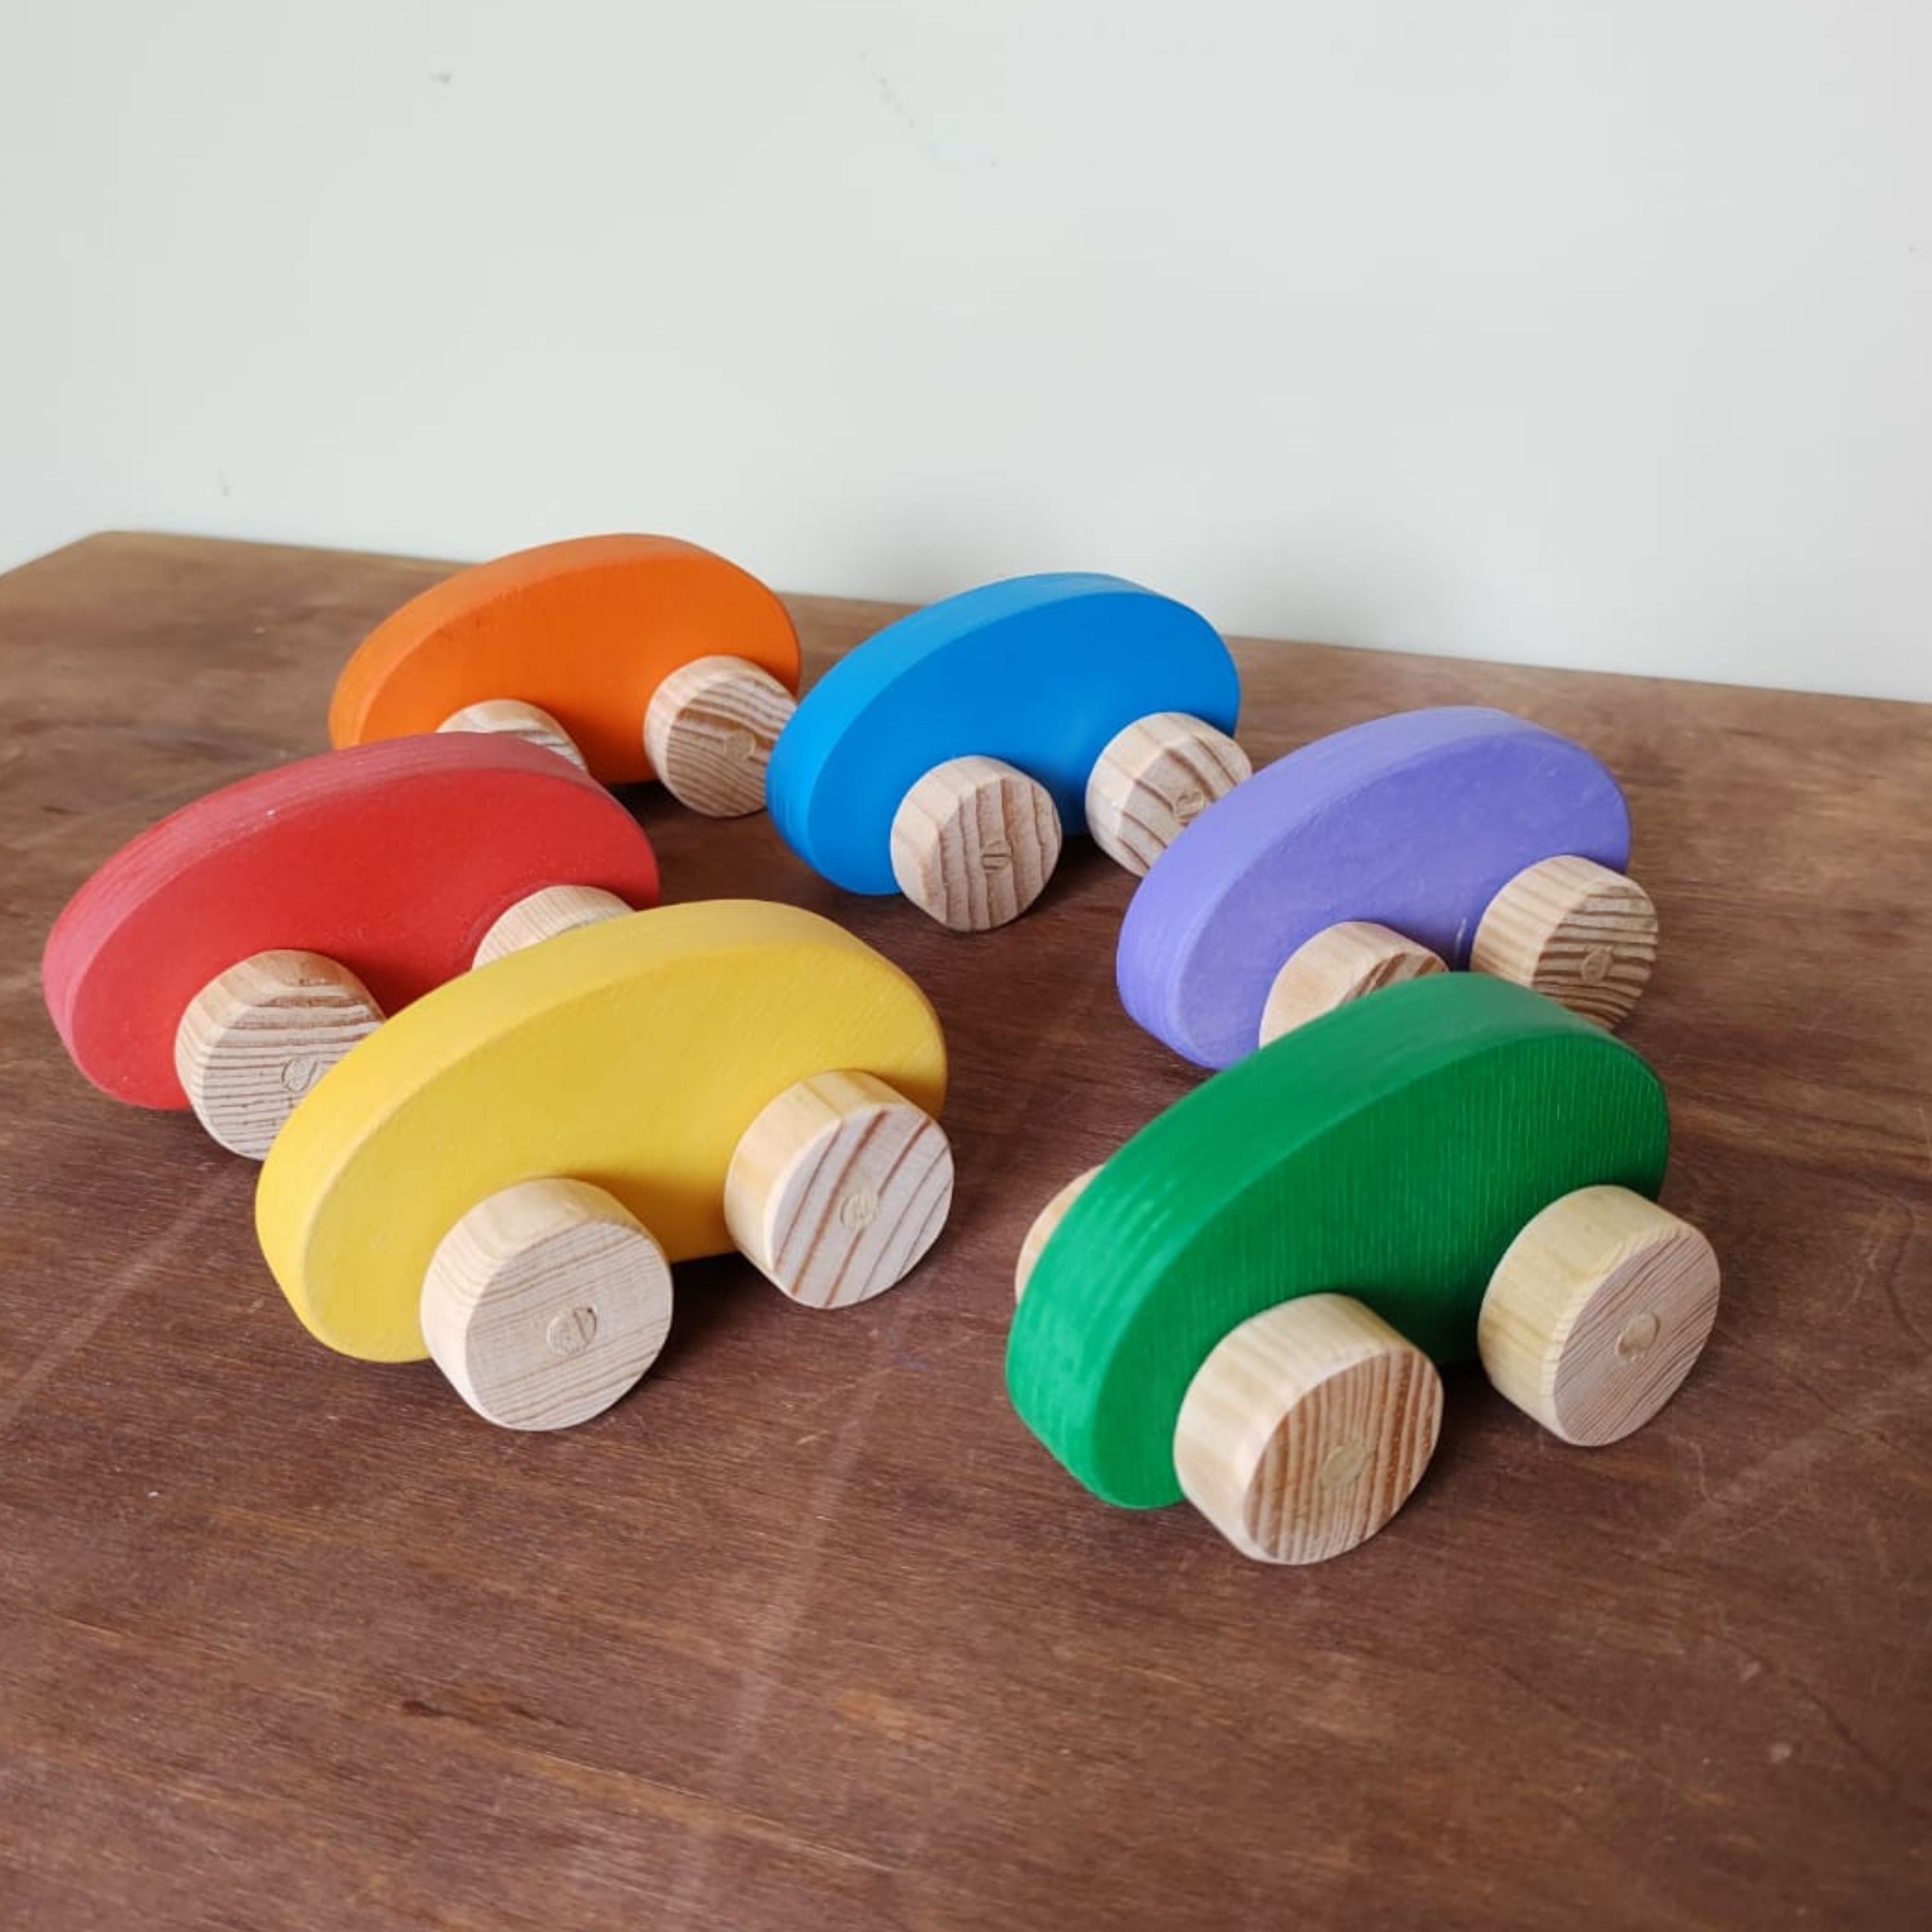 WOODEN RACING CARS SET by Wiwiurka Toys